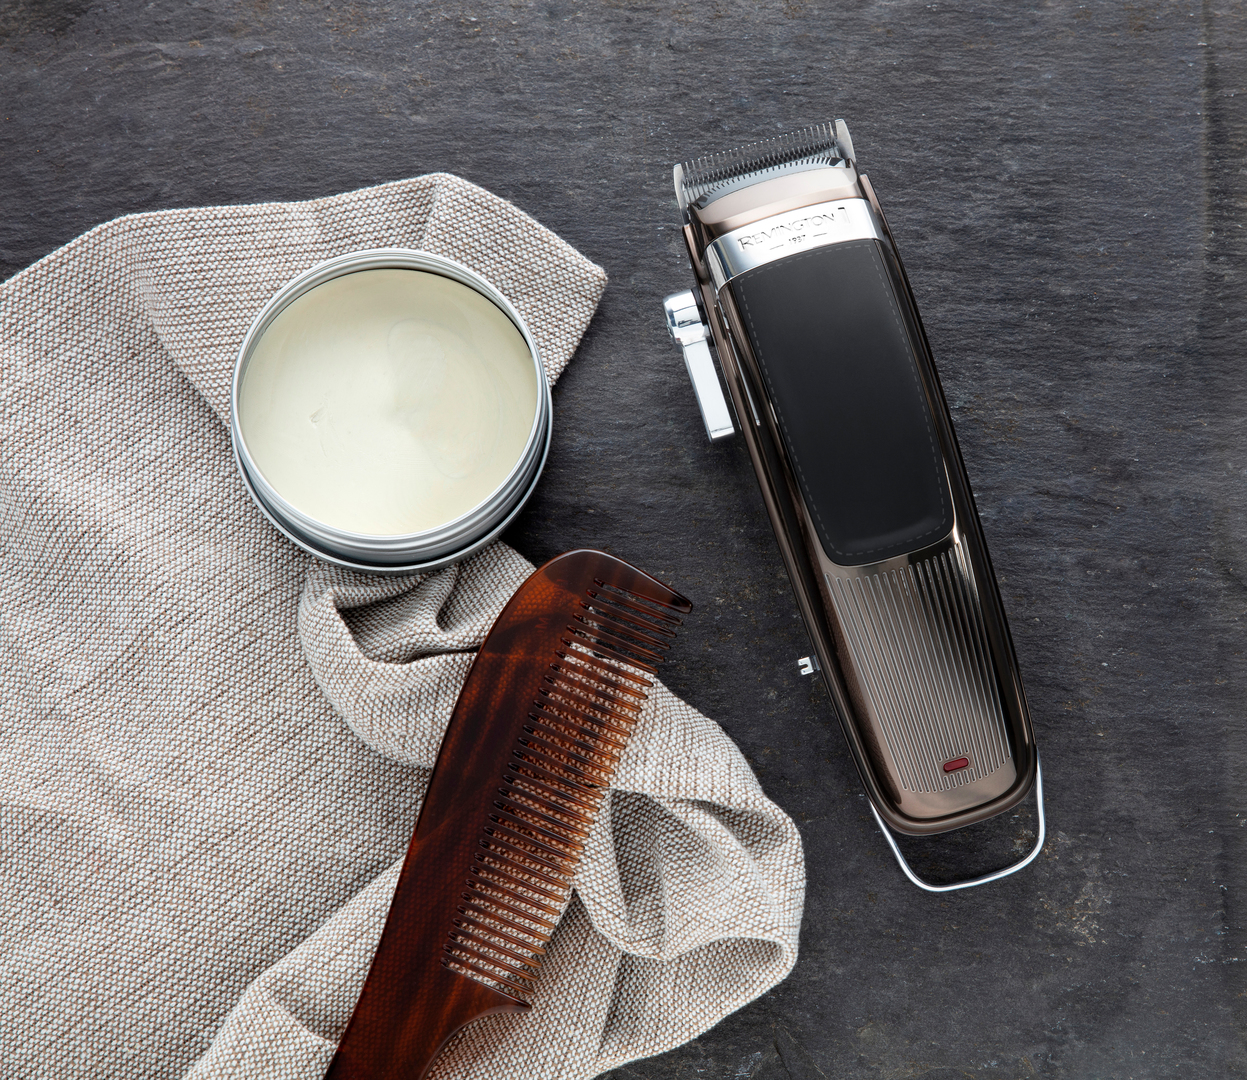 remington heritage hair clippers